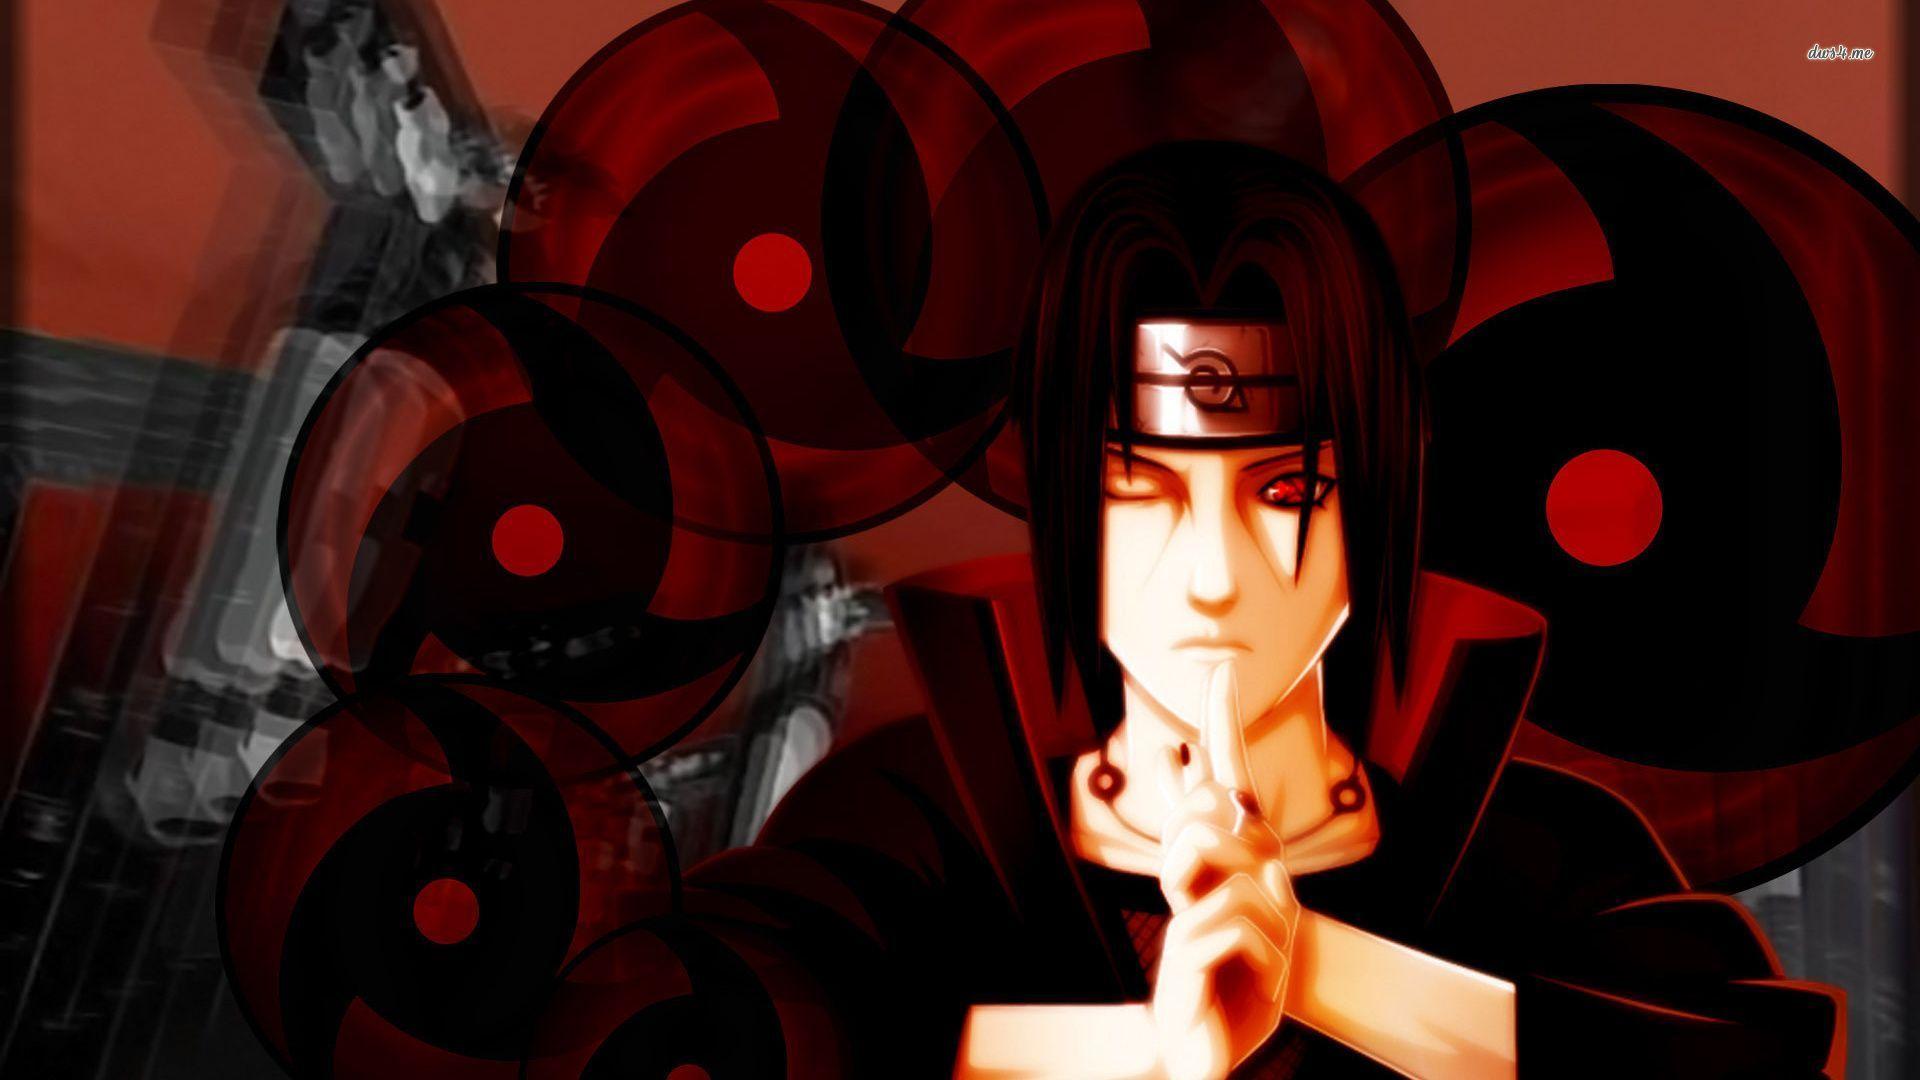 1920x1080 Itachi Wallpaper 4k Android - Anime Best Image